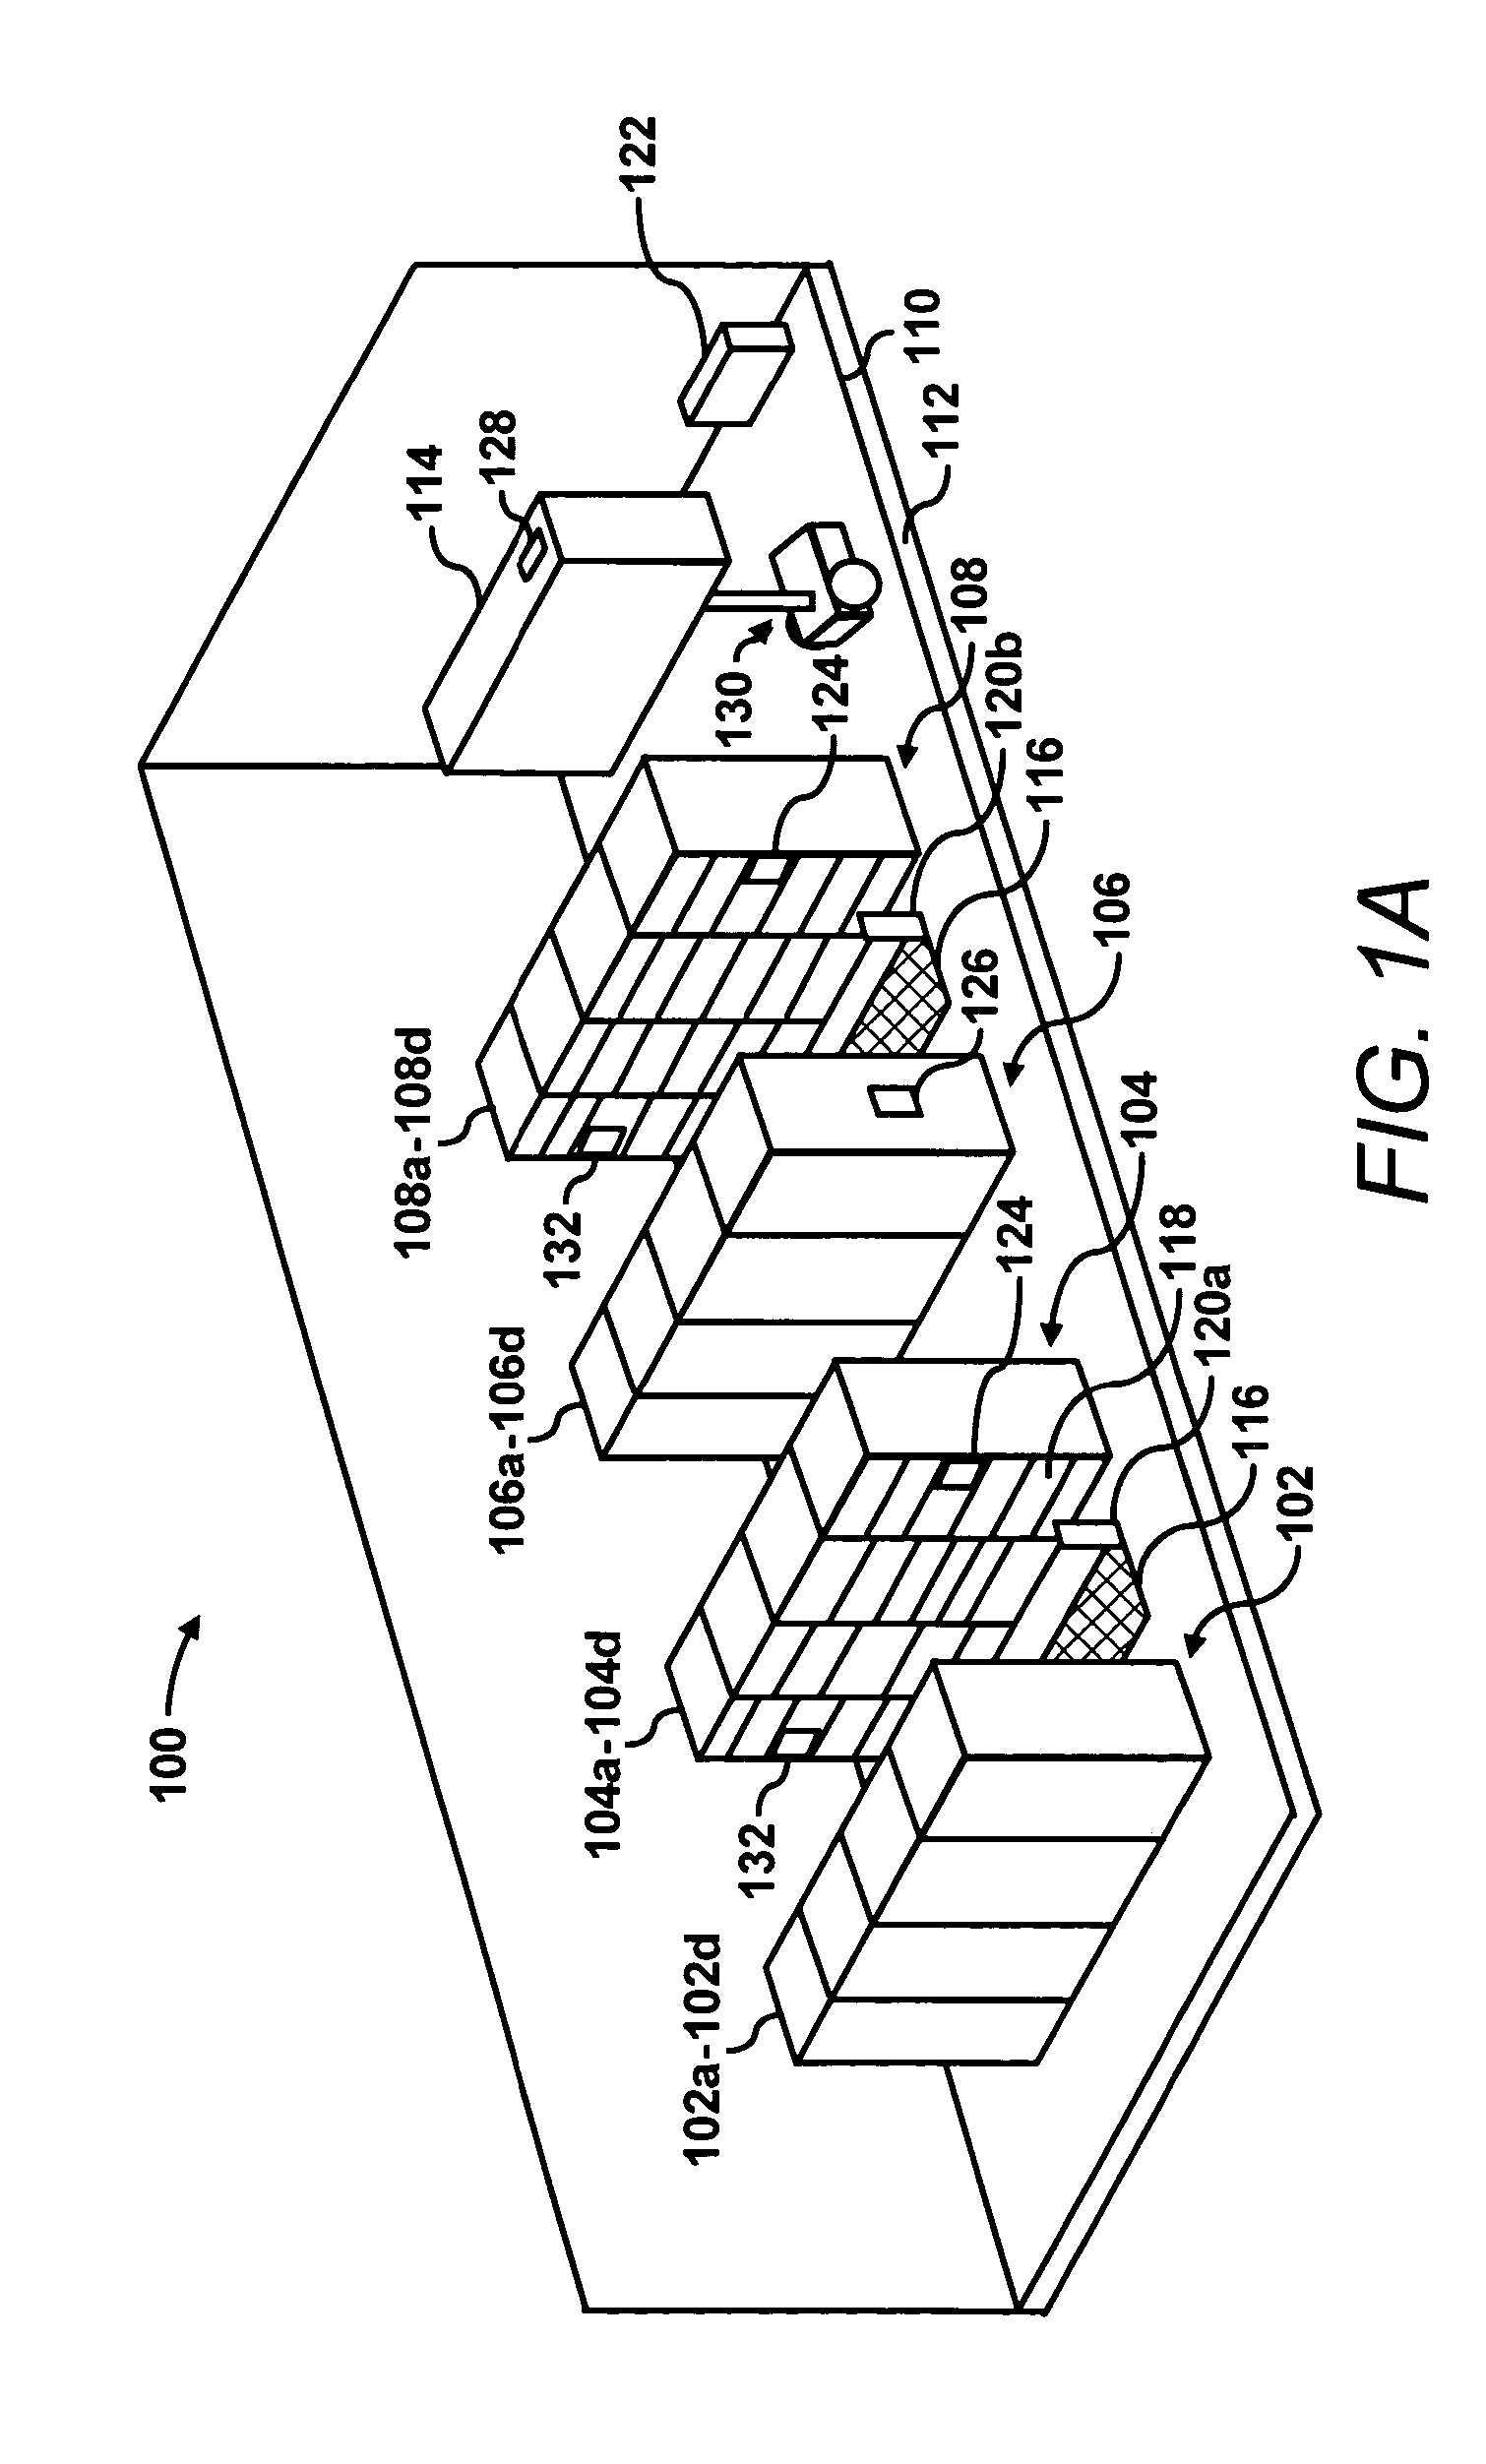 Cooling fluid provisioning with location aware sensors